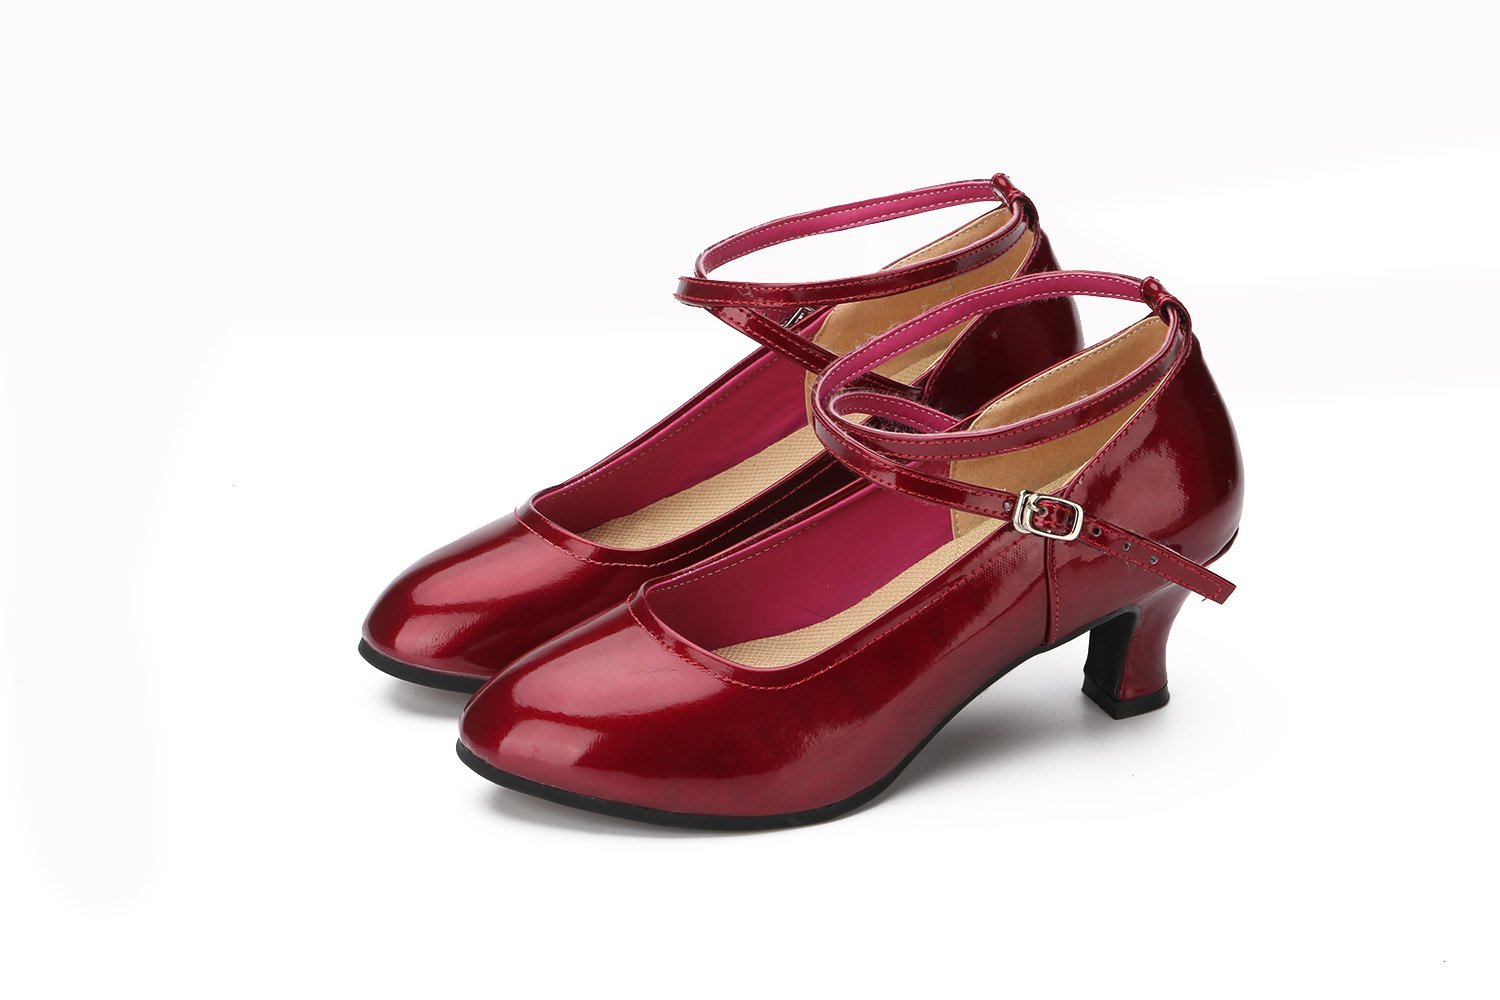 US$ 20.00] Women's Leatherette Heels Character Shoes With Buckle